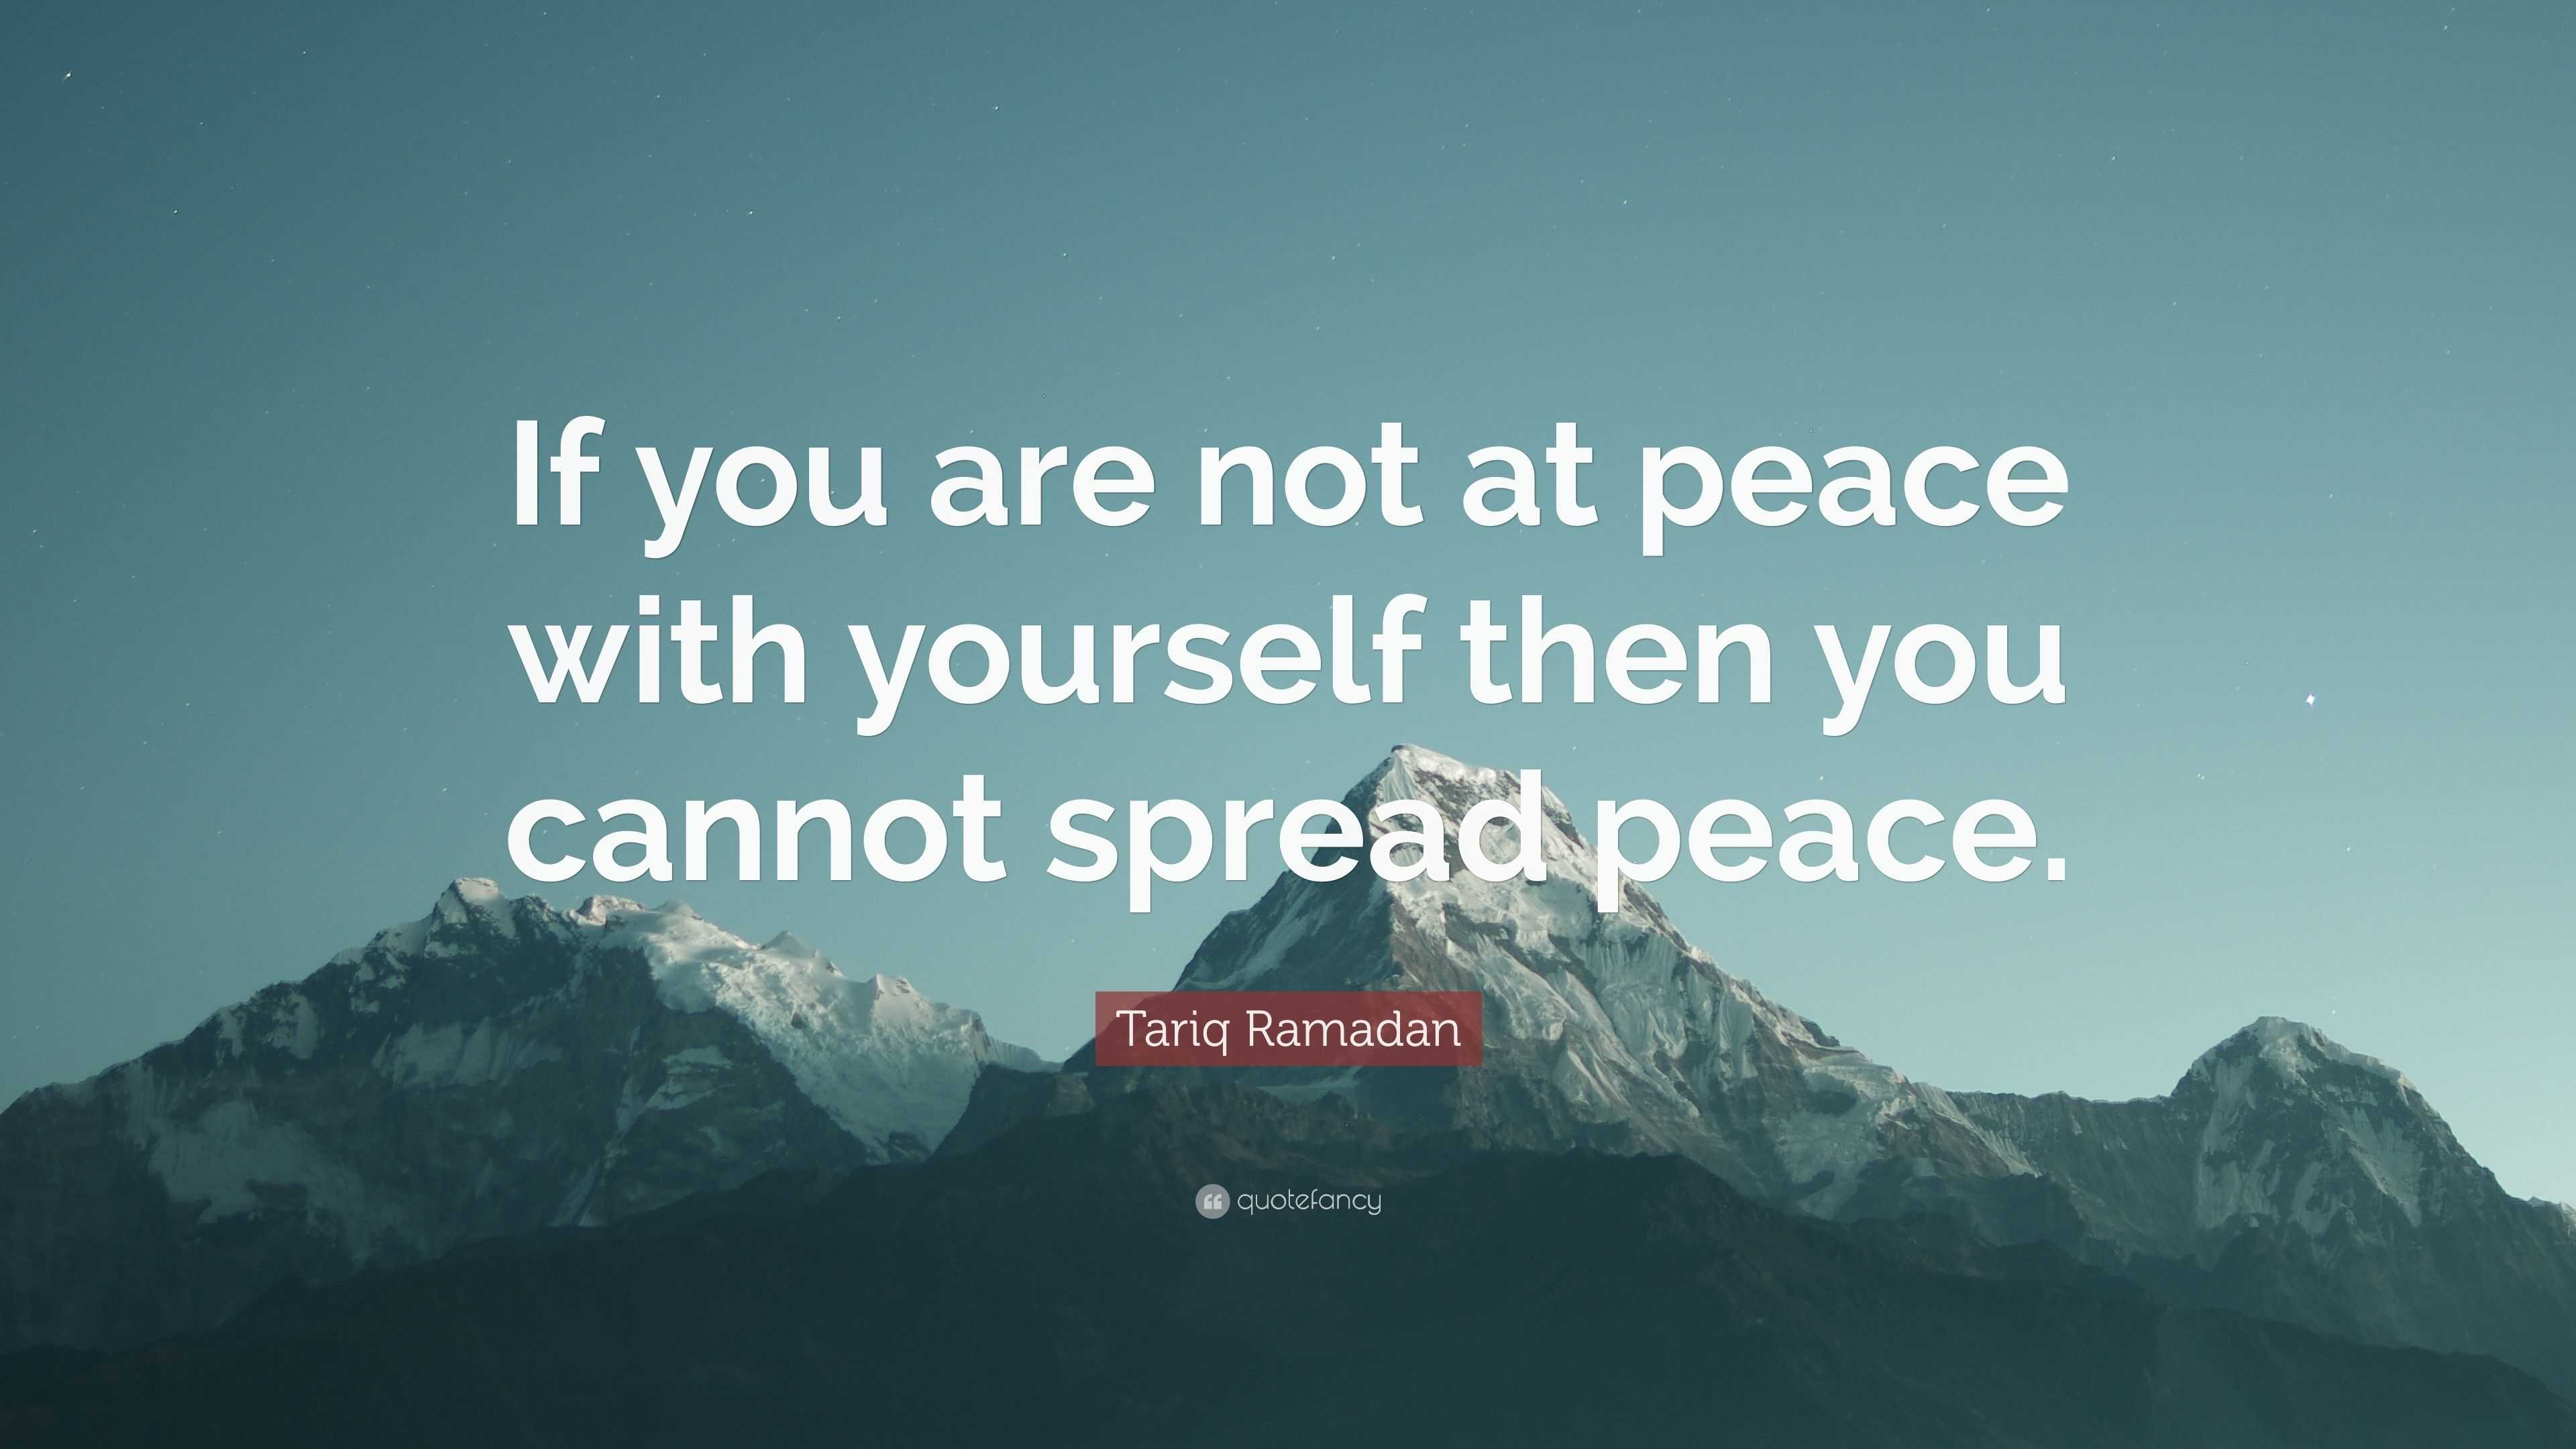 Tariq Ramadan Quote: “If you are not at peace with yourself then you ...